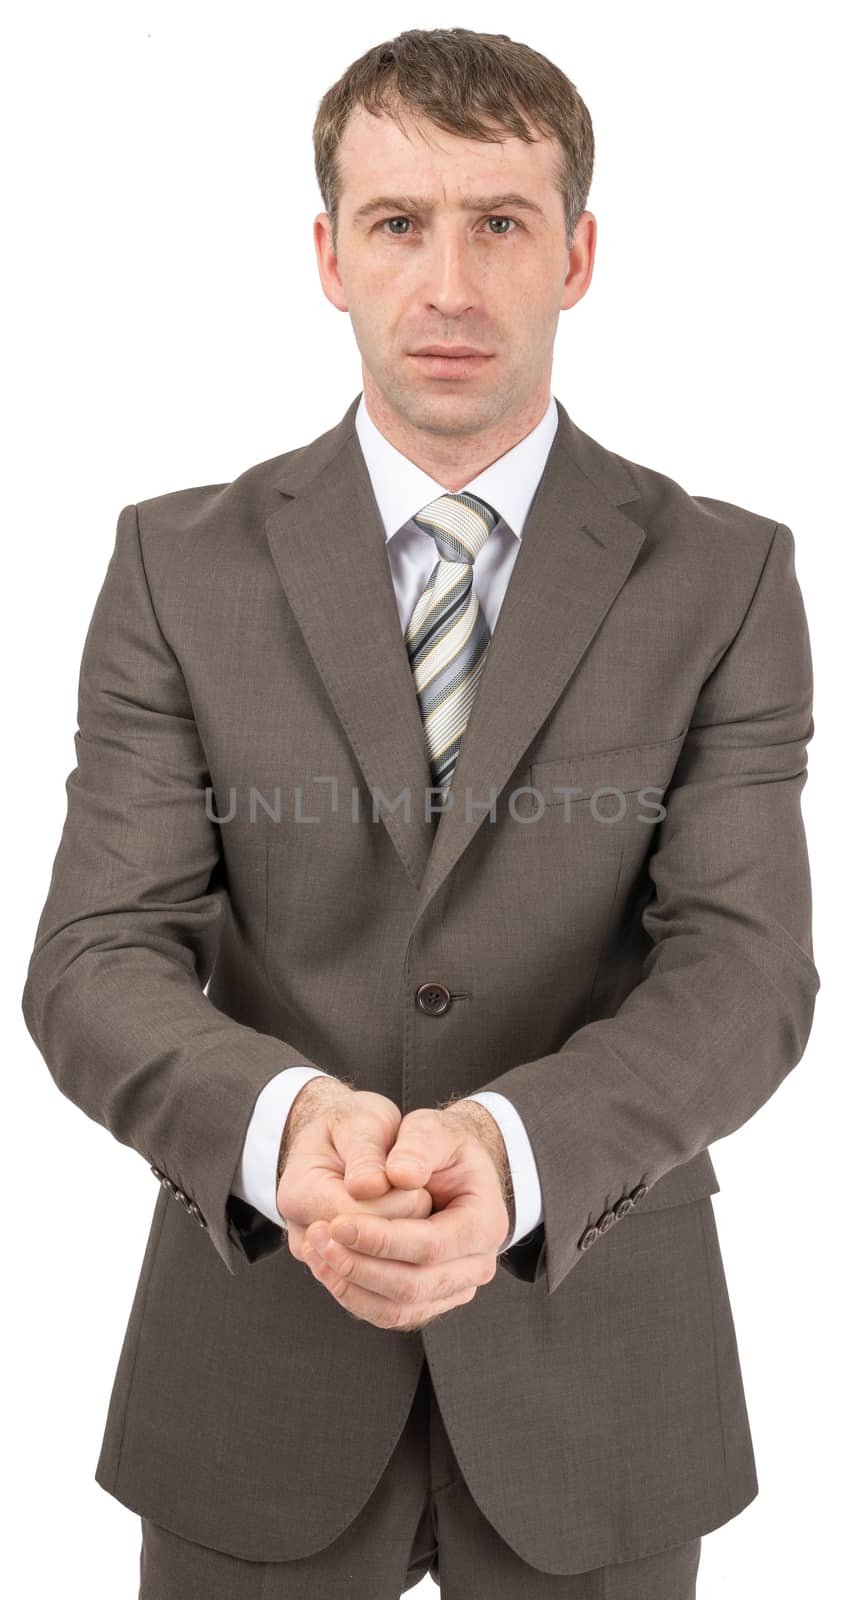 Unhappy businessman holding hands in front of him by cherezoff